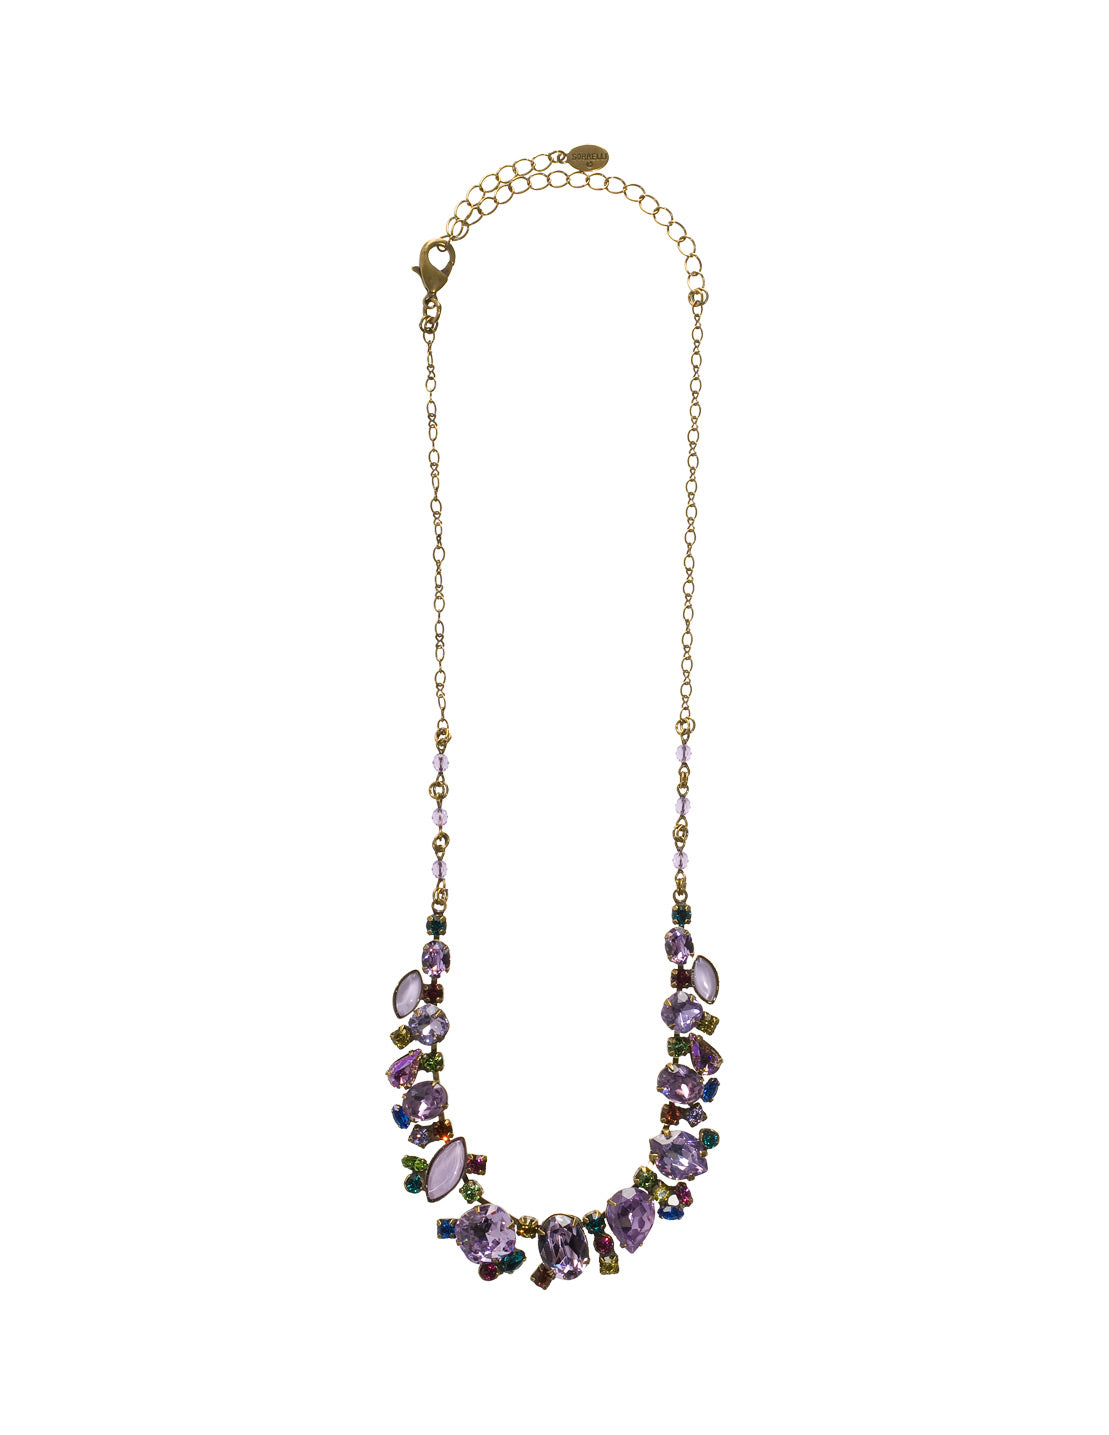 Multi-Cut Crystal Necklace Tennis Necklace - NCG20AGHAR - An absolute statement piece. Can be worn alone or with crystal drop earrings for the ultimate glow. From Sorrelli's Harmony collection in our Antique Gold-tone finish.